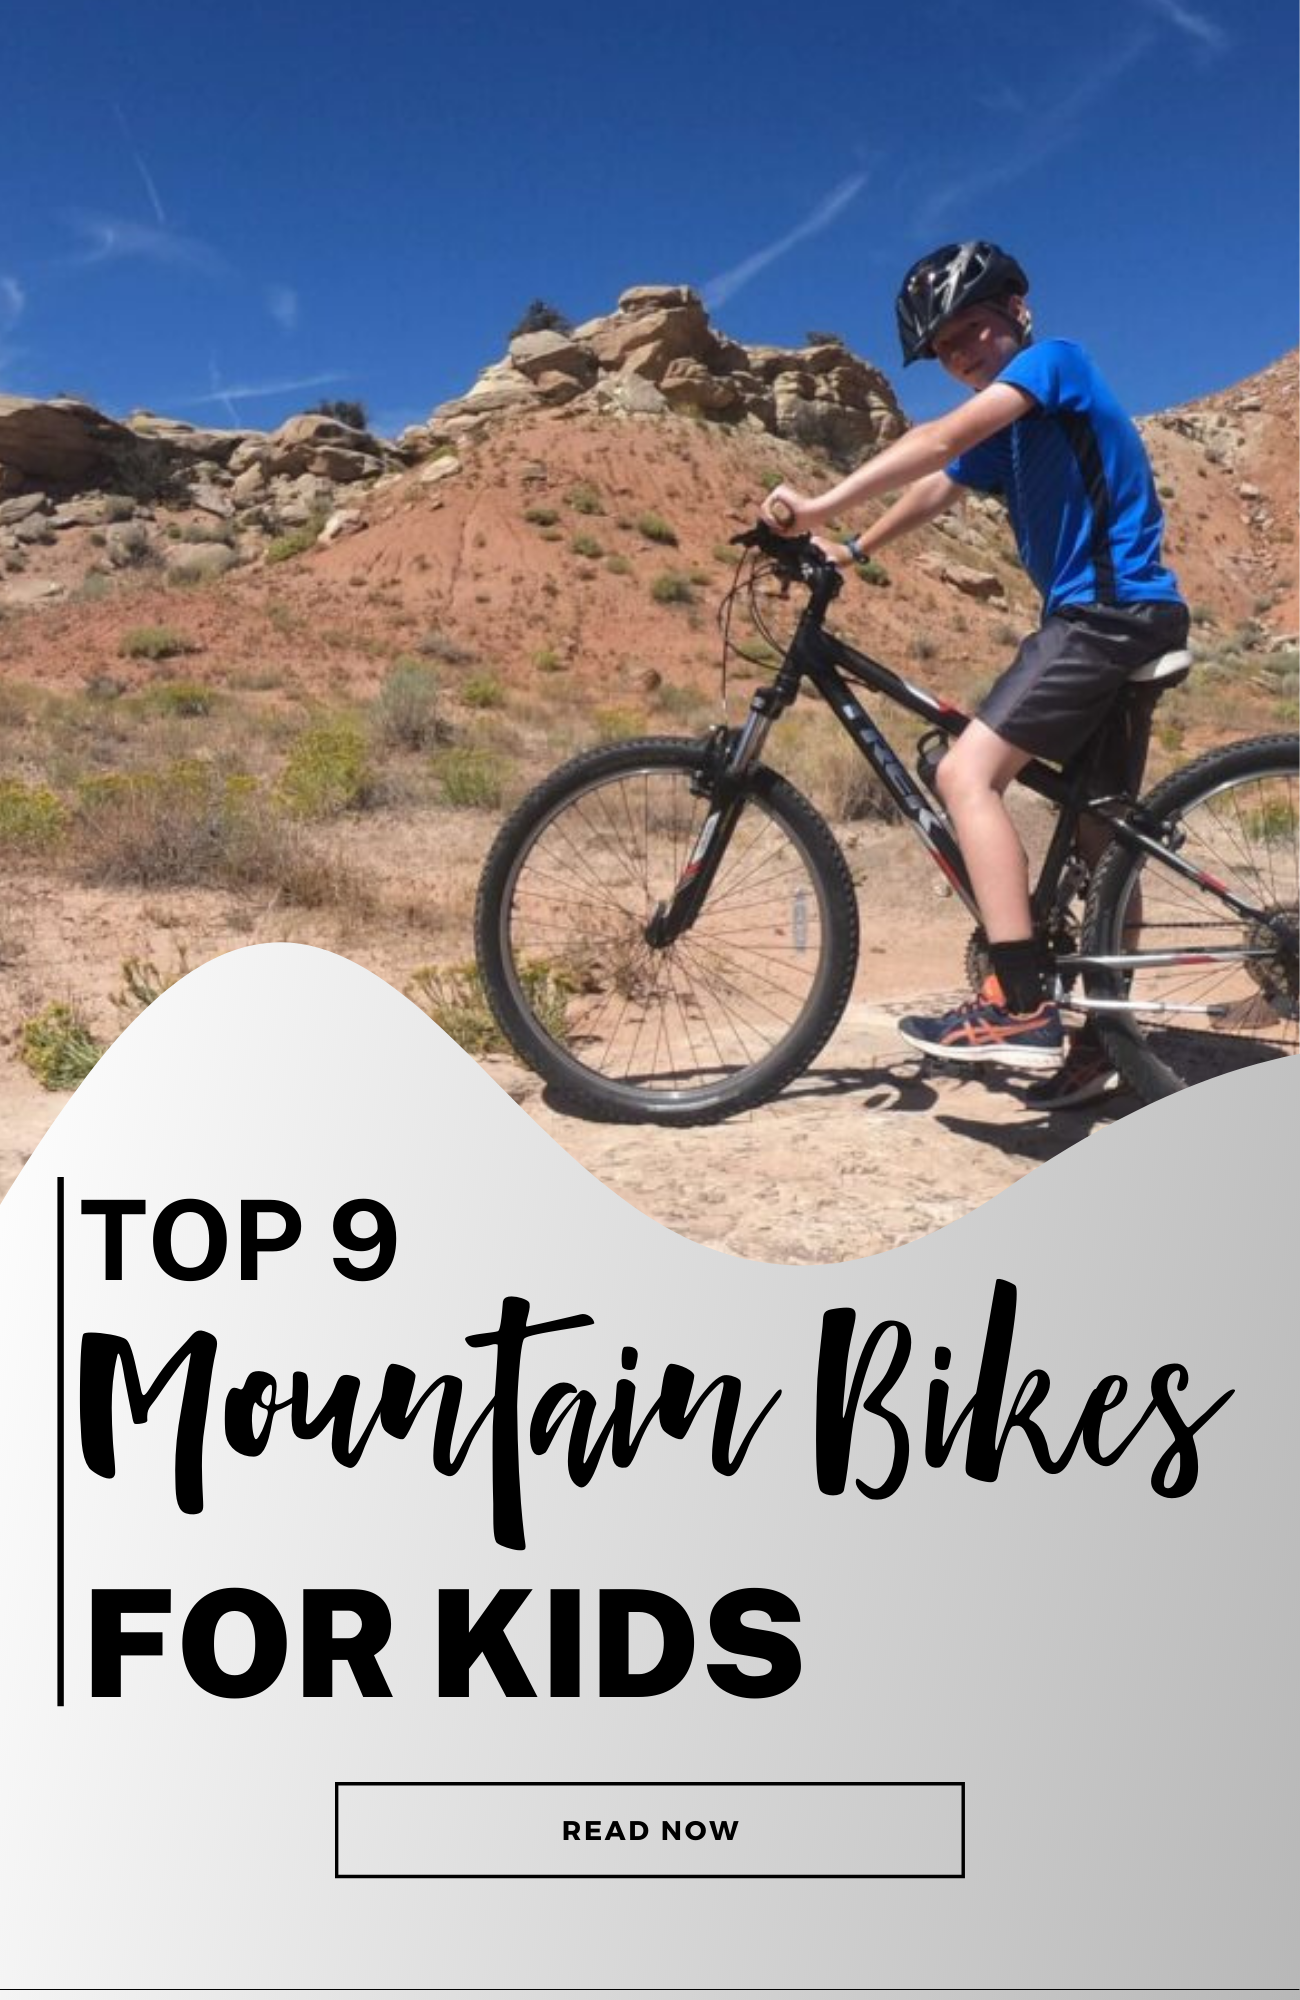 Mountain bike for kids -- A hardtail or front suspension mountain bike for kids is a great choice because it allows them to control the bike easier. 